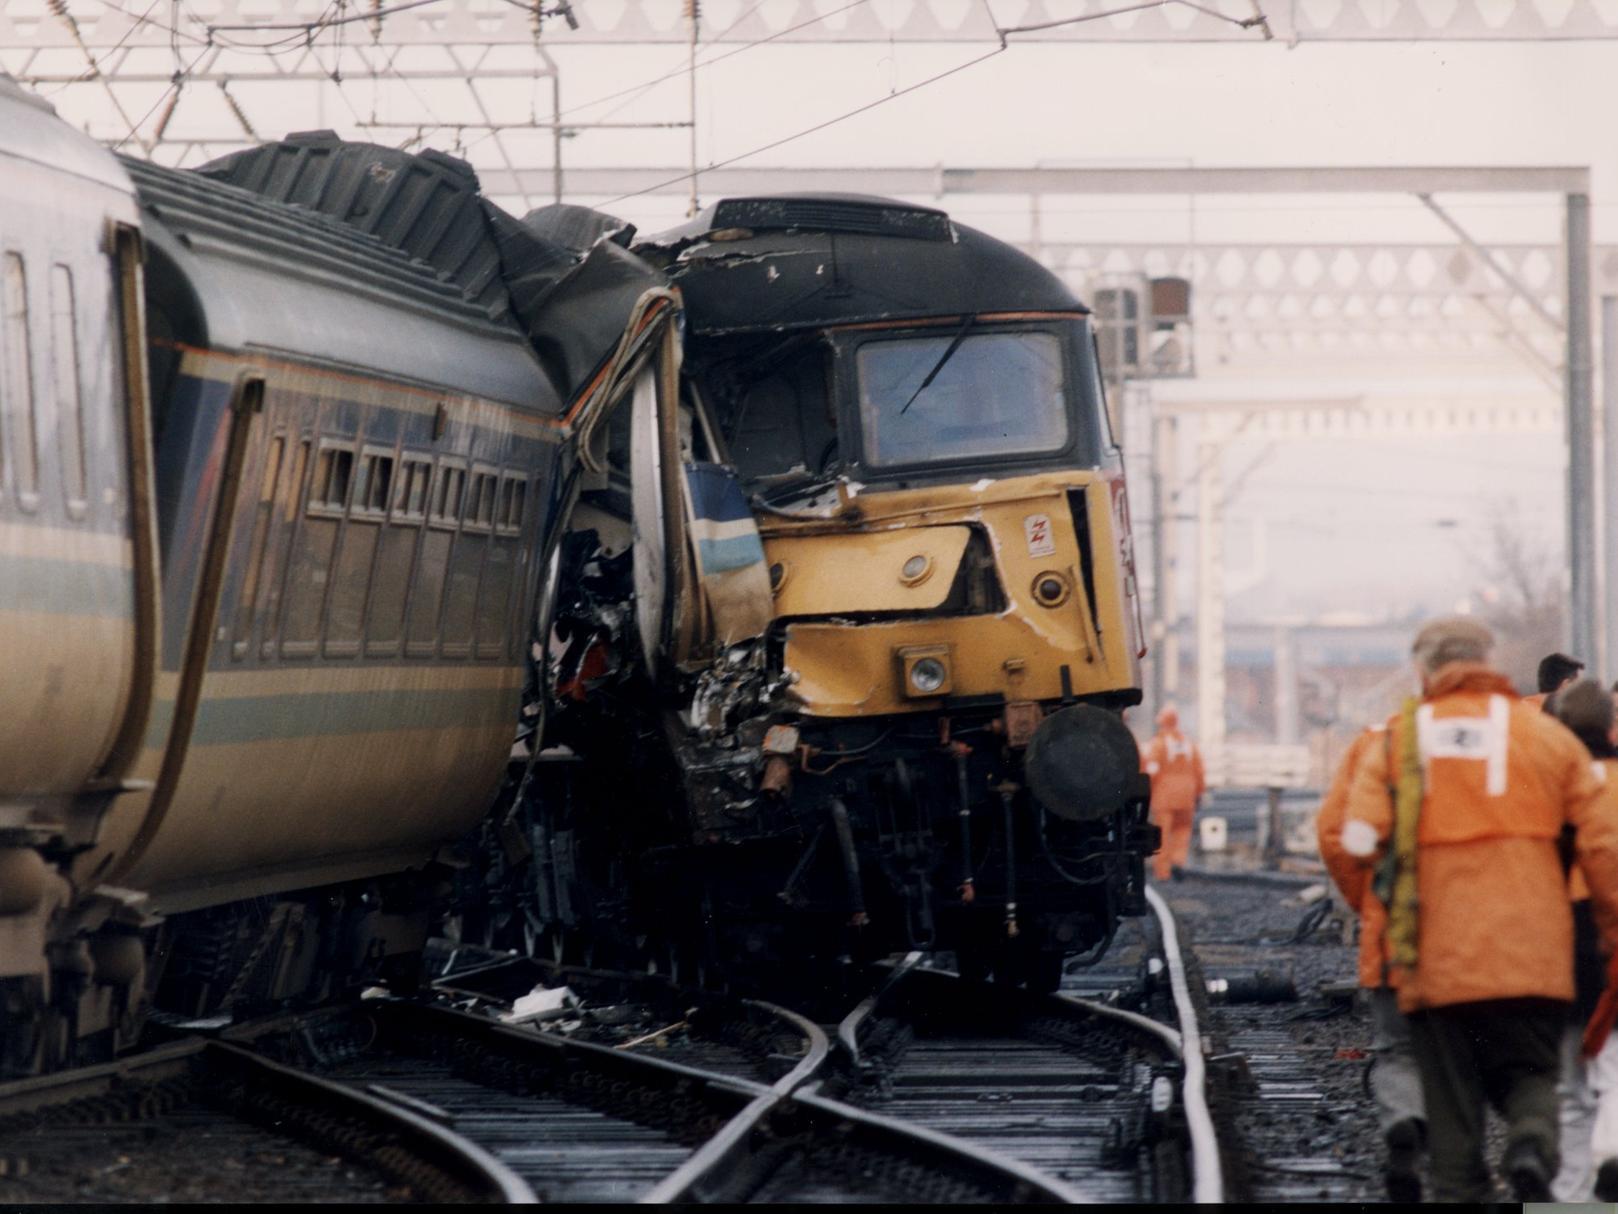 Two trains collided at the edge of Leeds City Station causing widespread chaos for the travelling public.